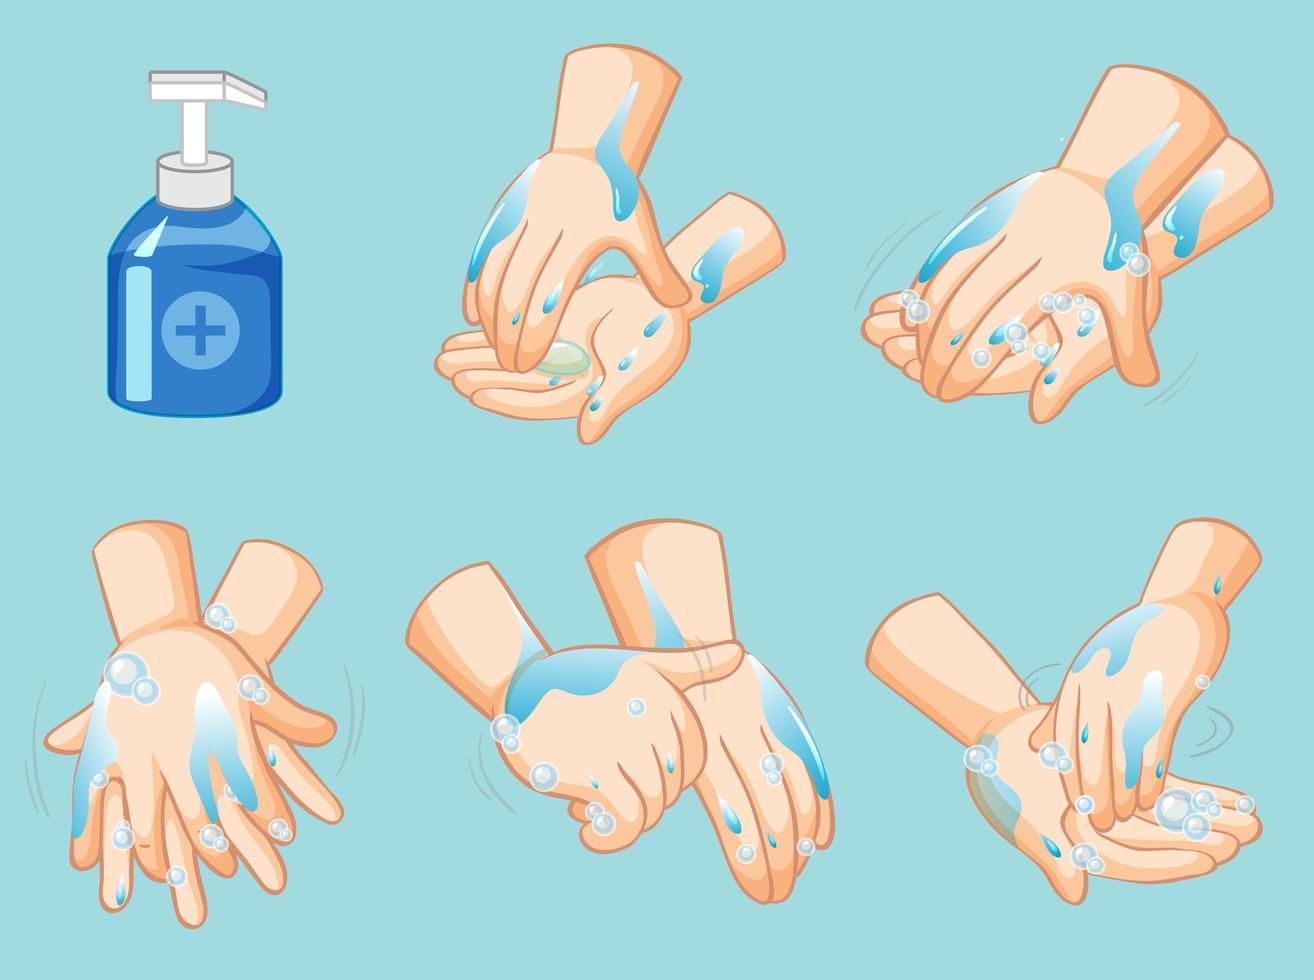 Step by step washing hands poster  vector